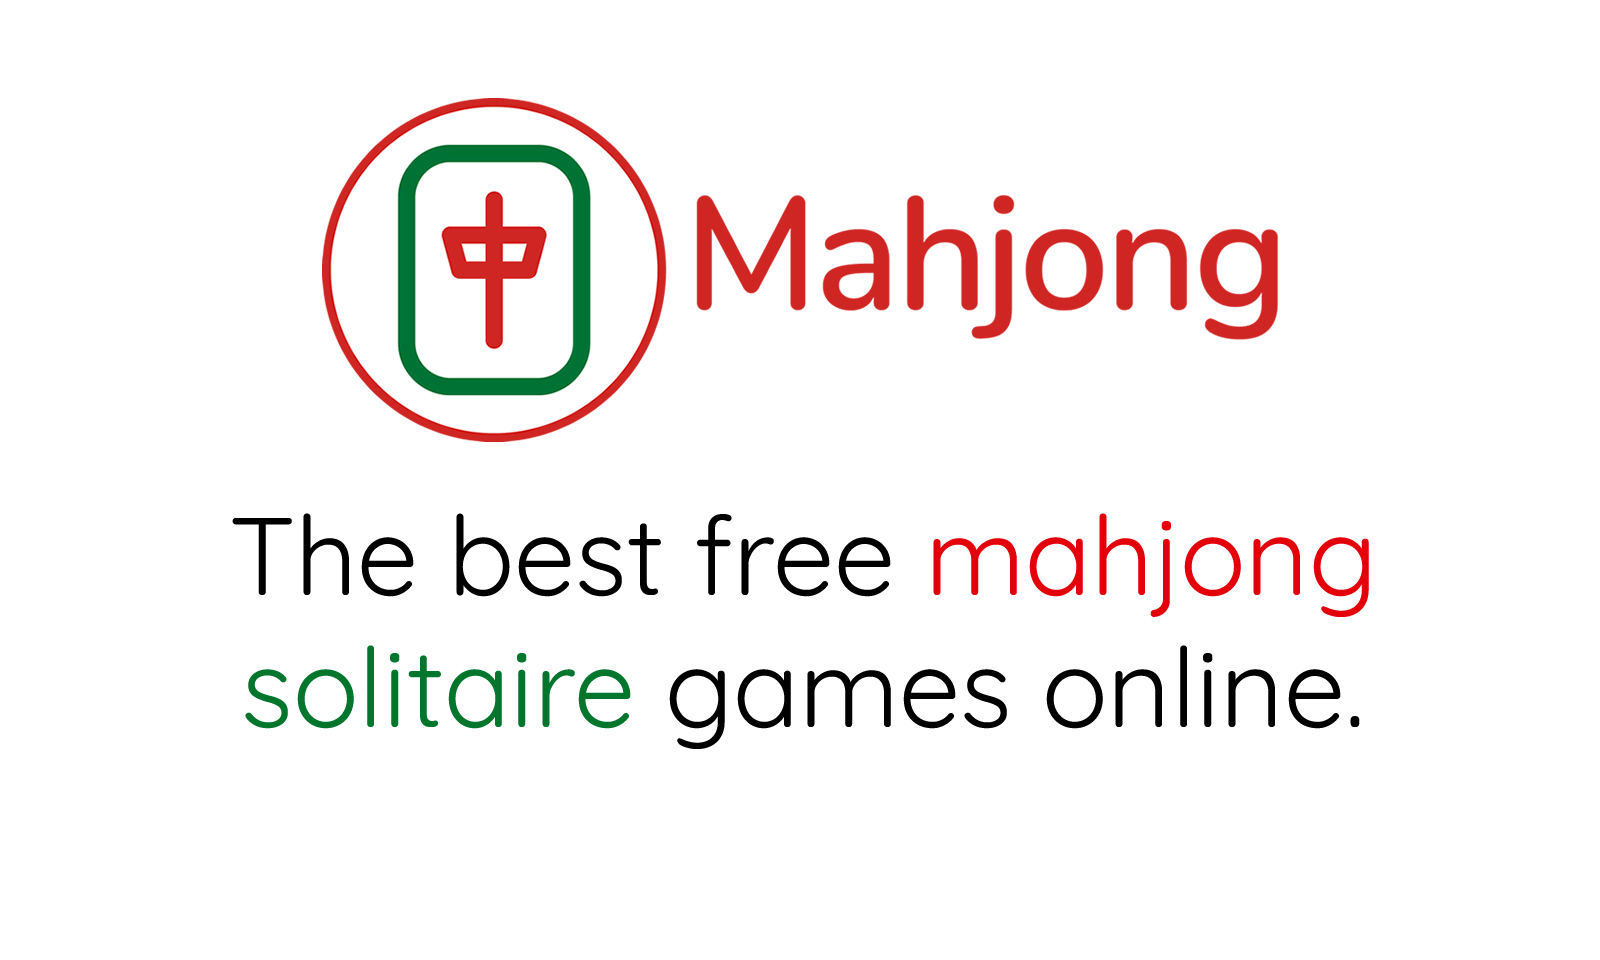 Game Mahjong Alchemy online. Play for free